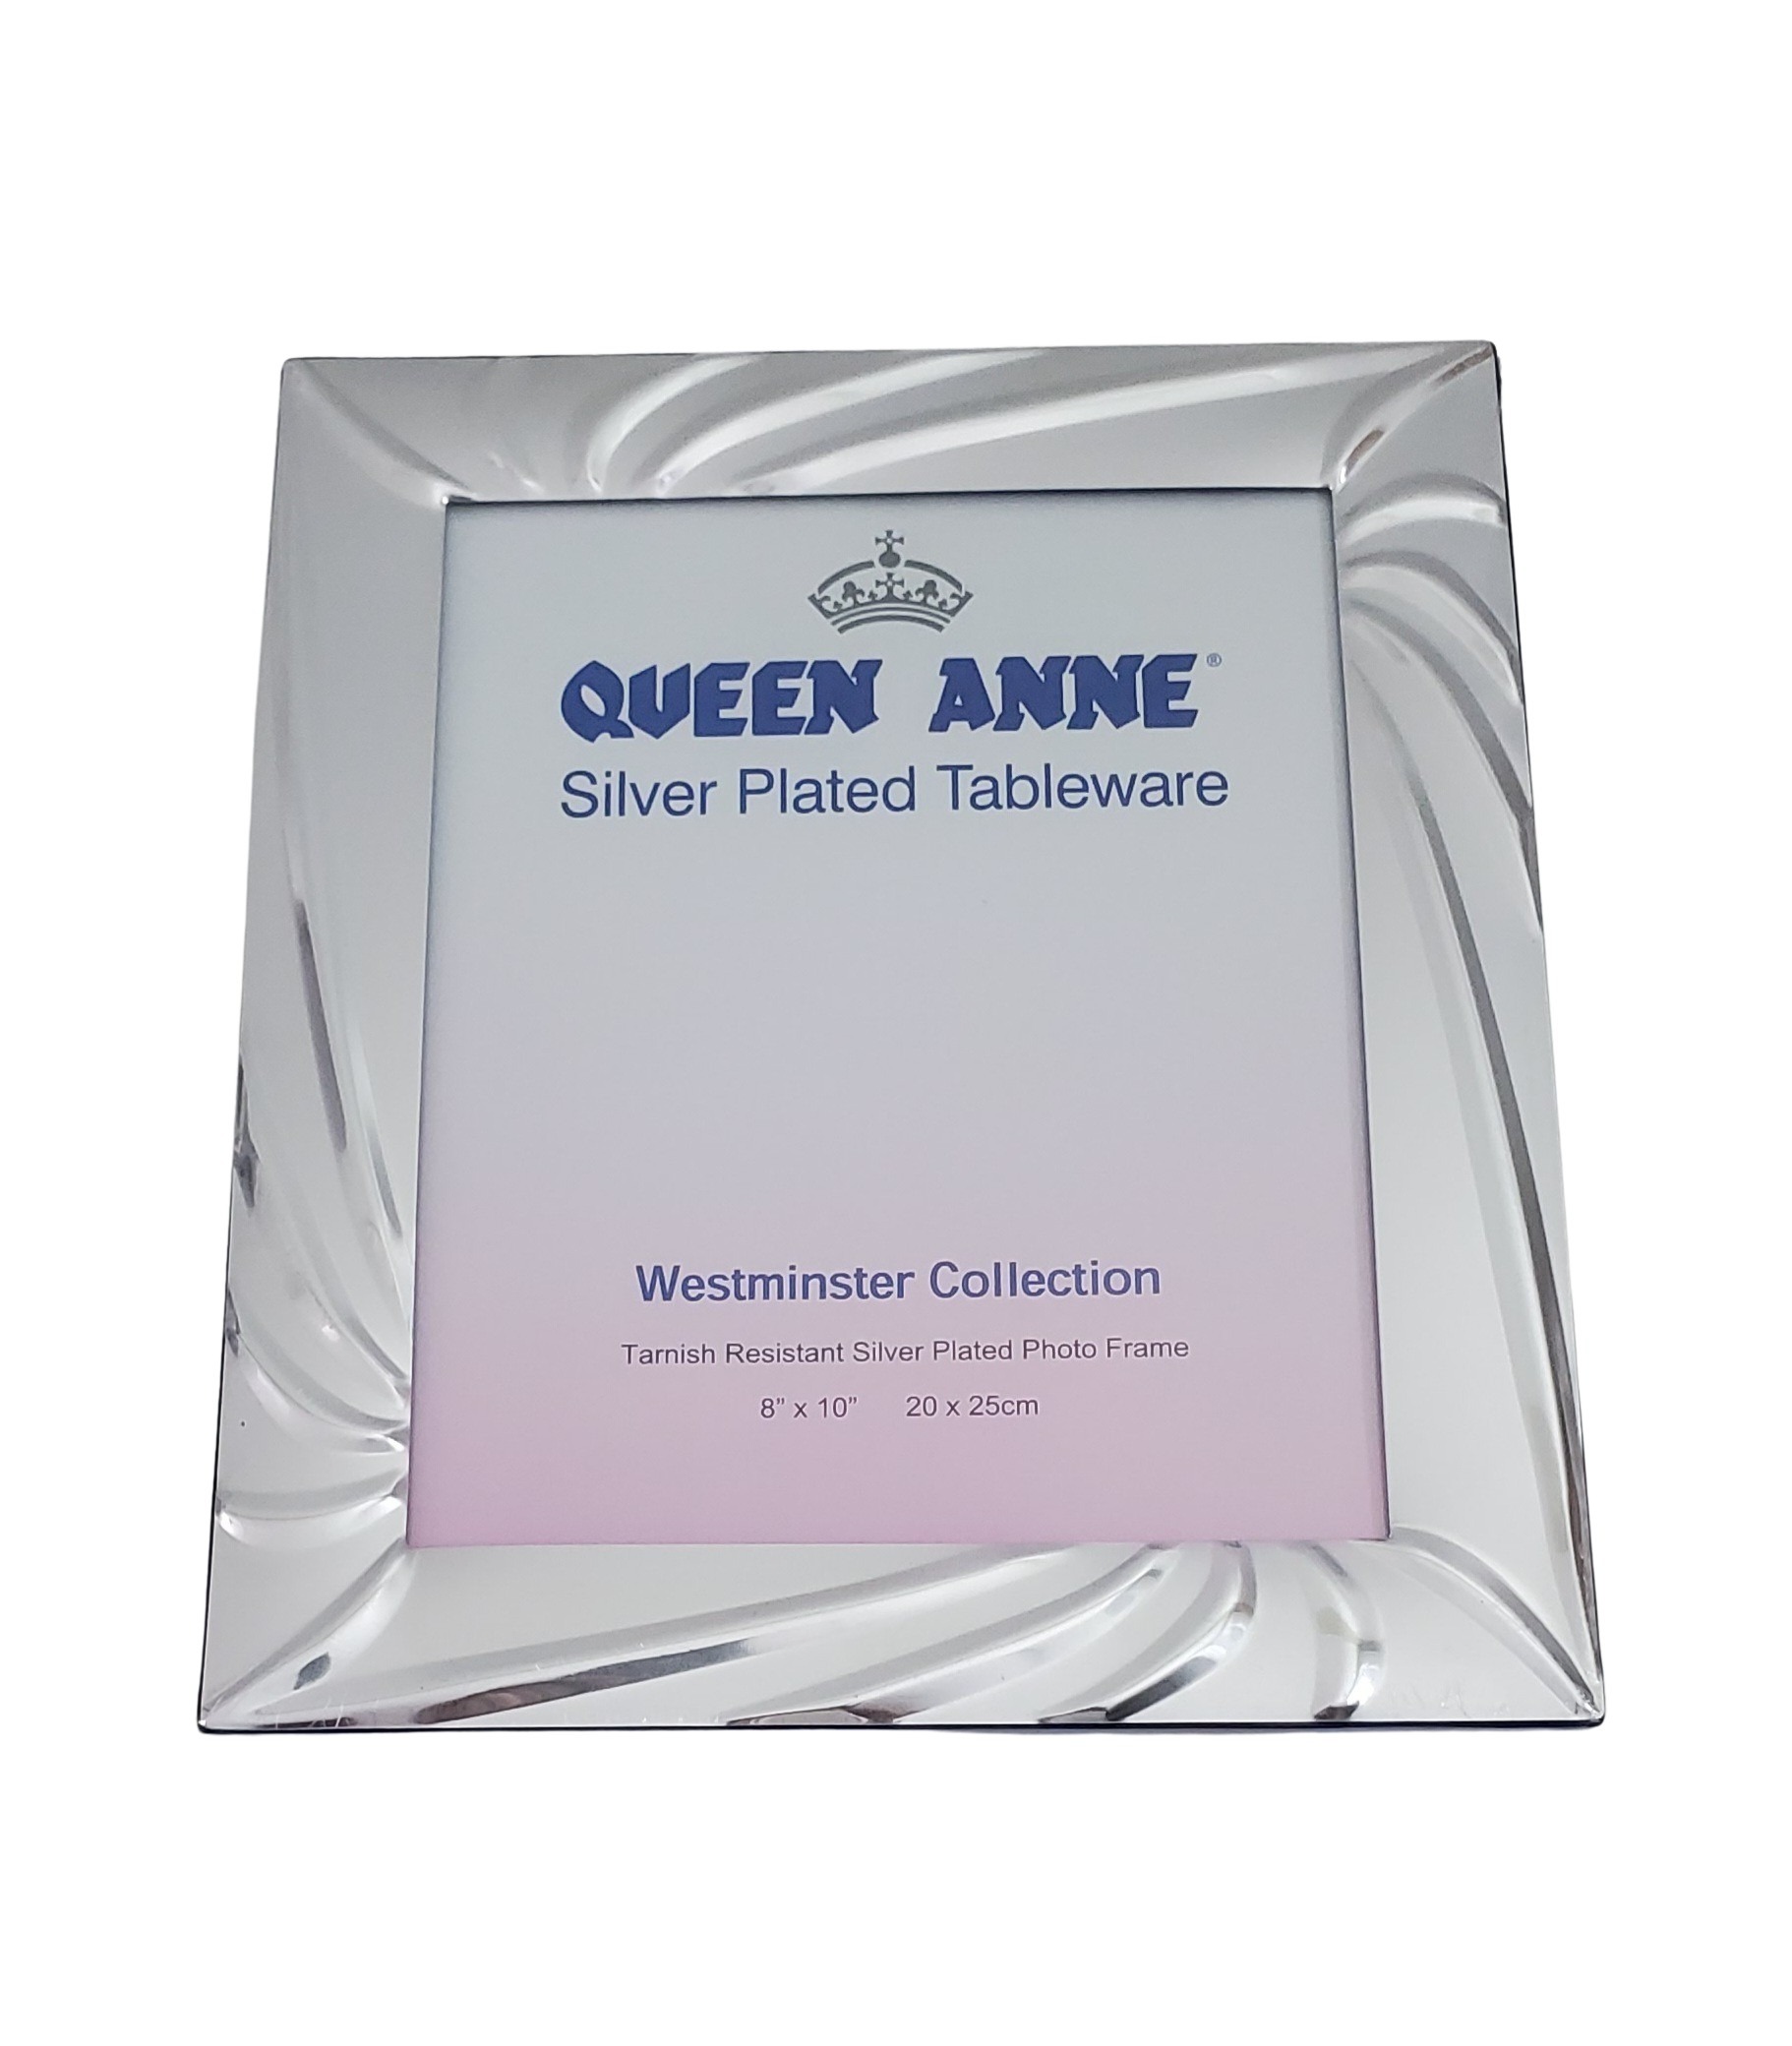 8" x 10" Silver Plated English Photo Frame Westminster Collection (Non Tarnish)